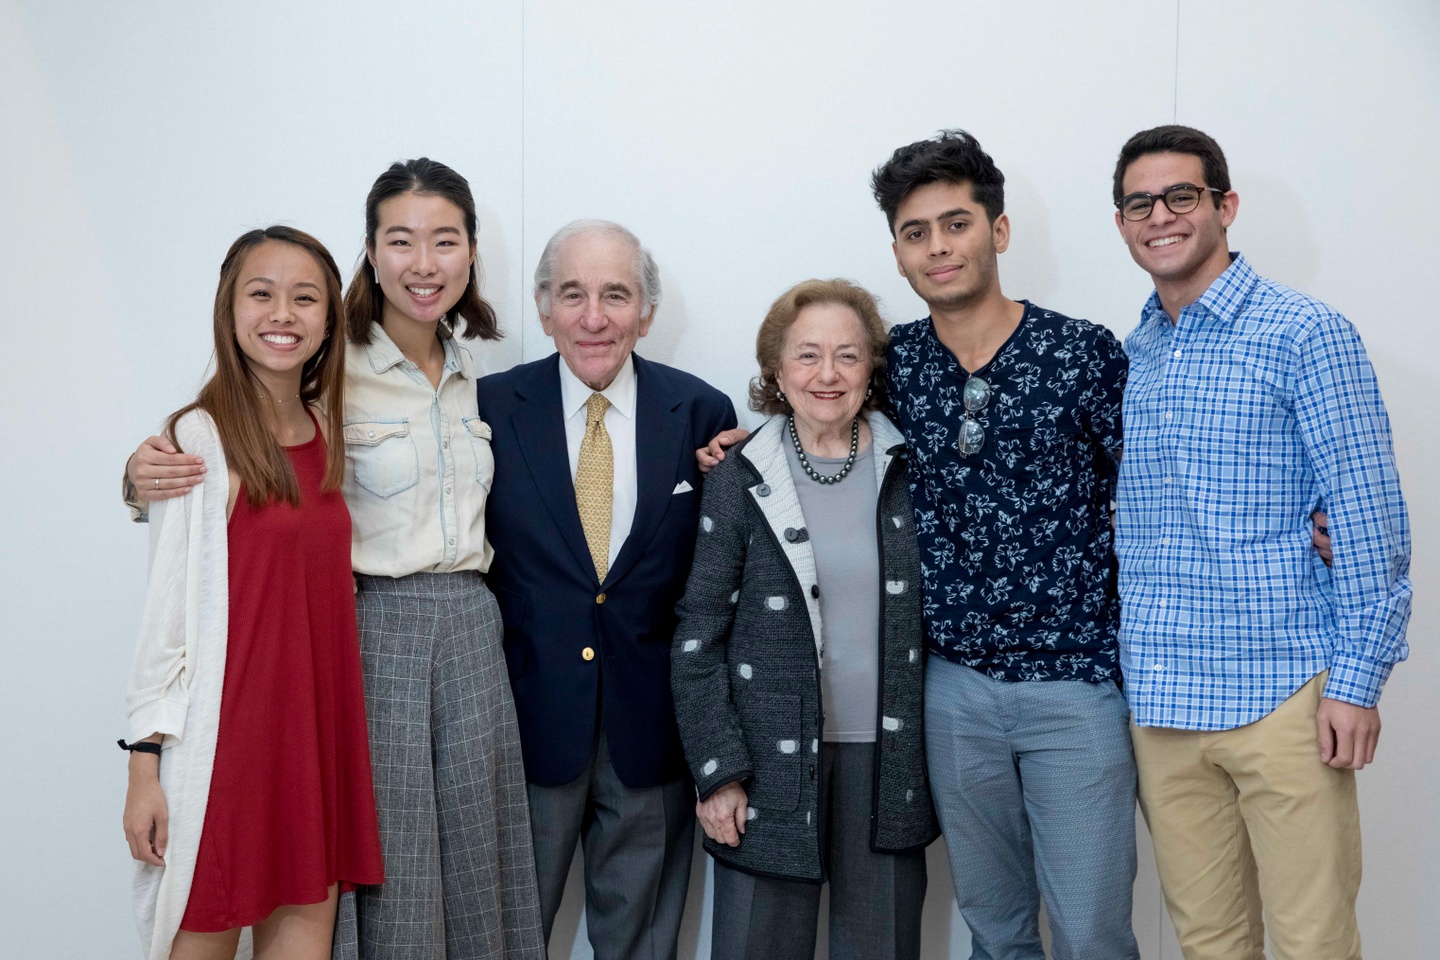 Four young adults and two older adults pose for a group photo.